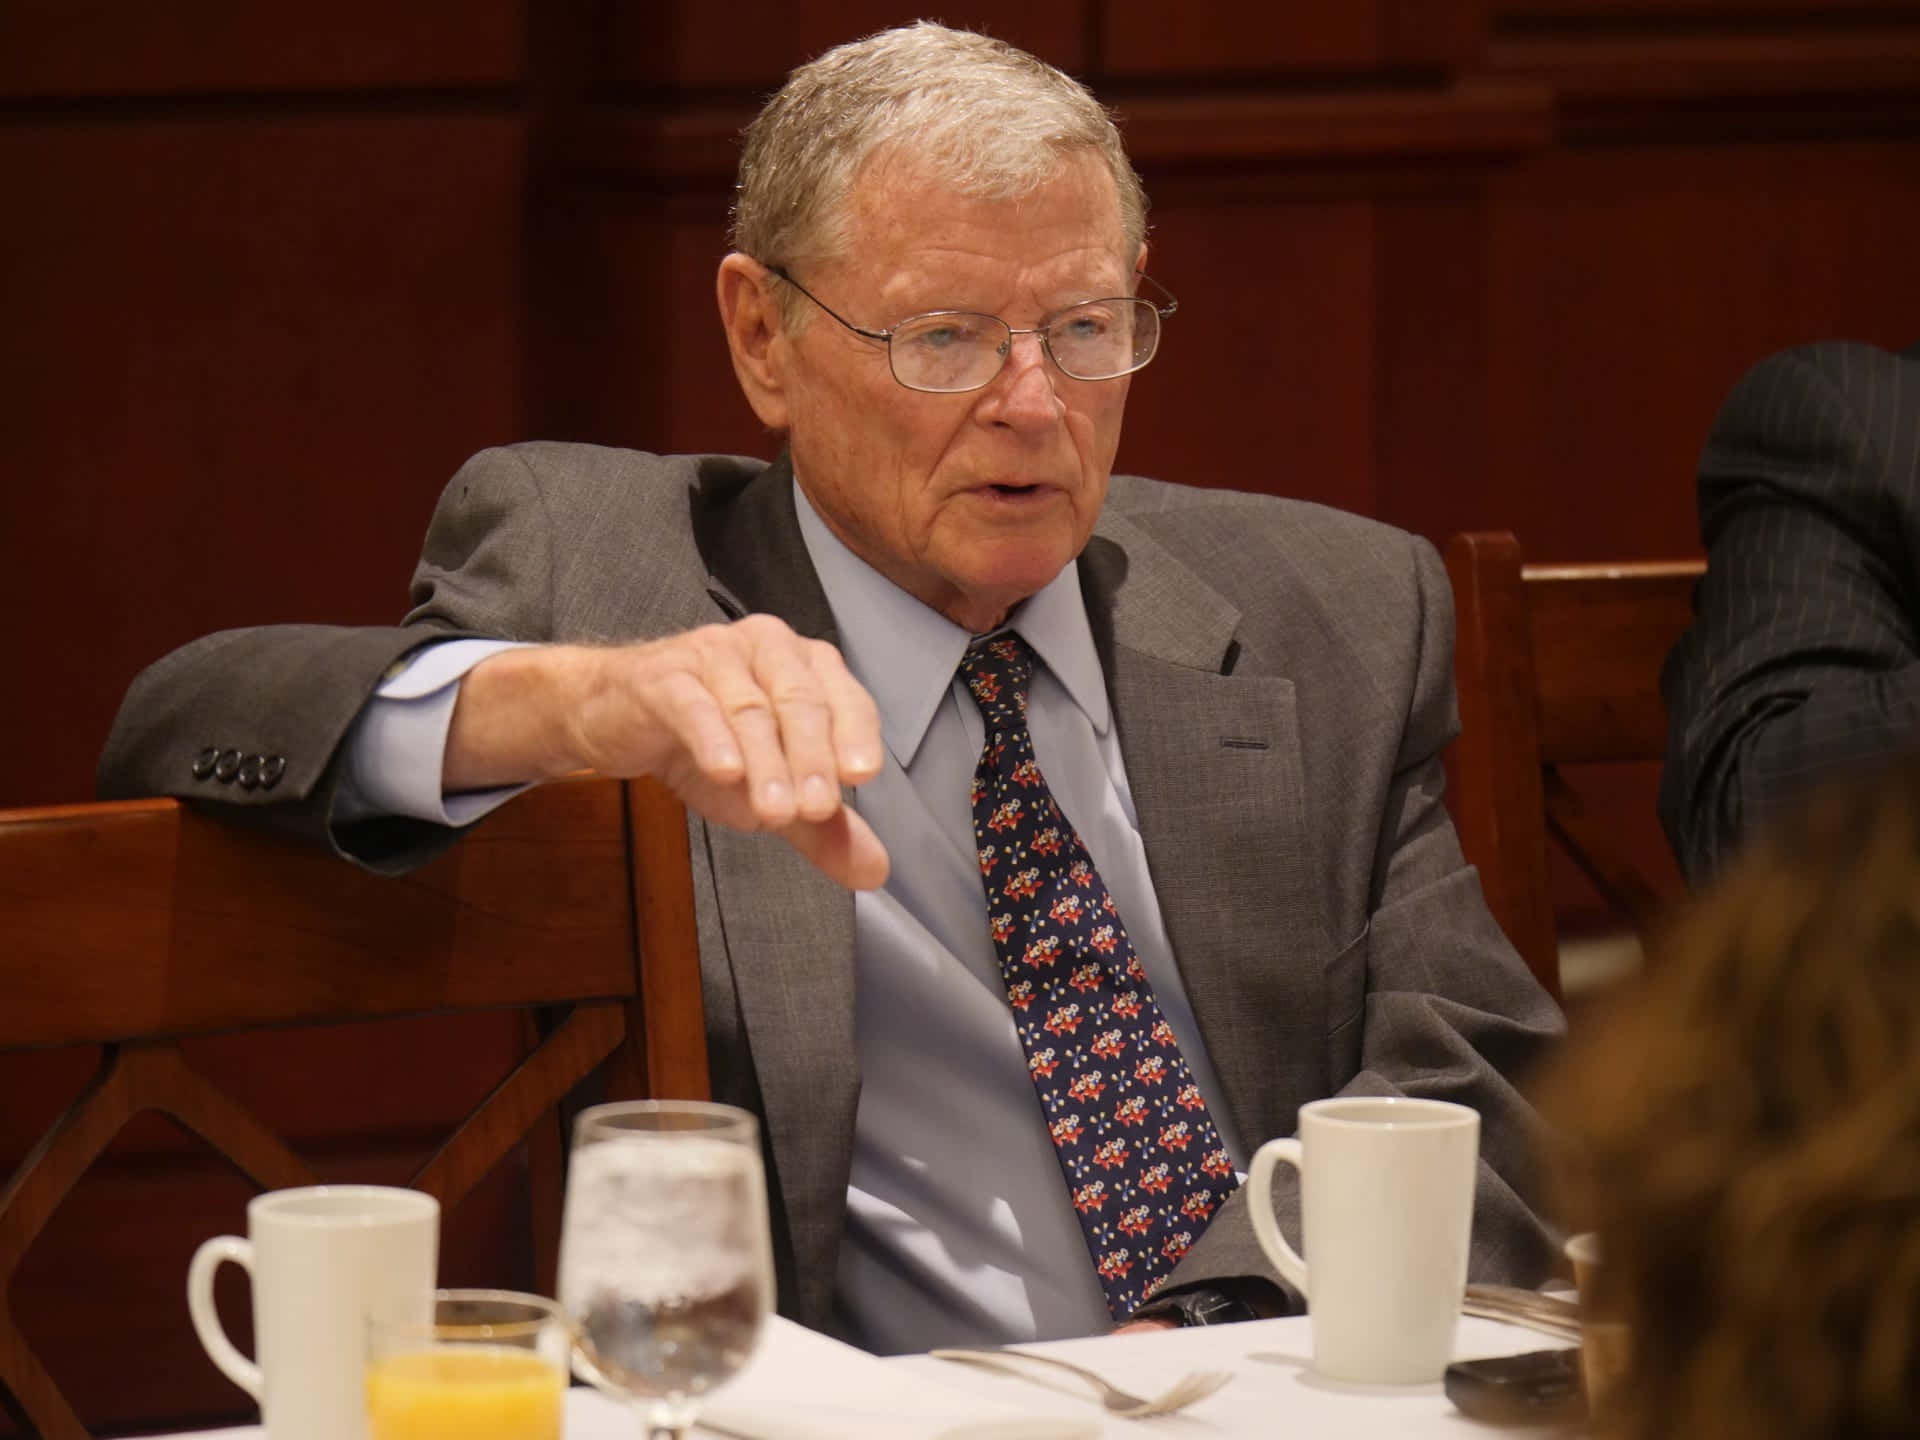 Senator Jim Inhofe Seated at a Table During a Discussion Wallpaper